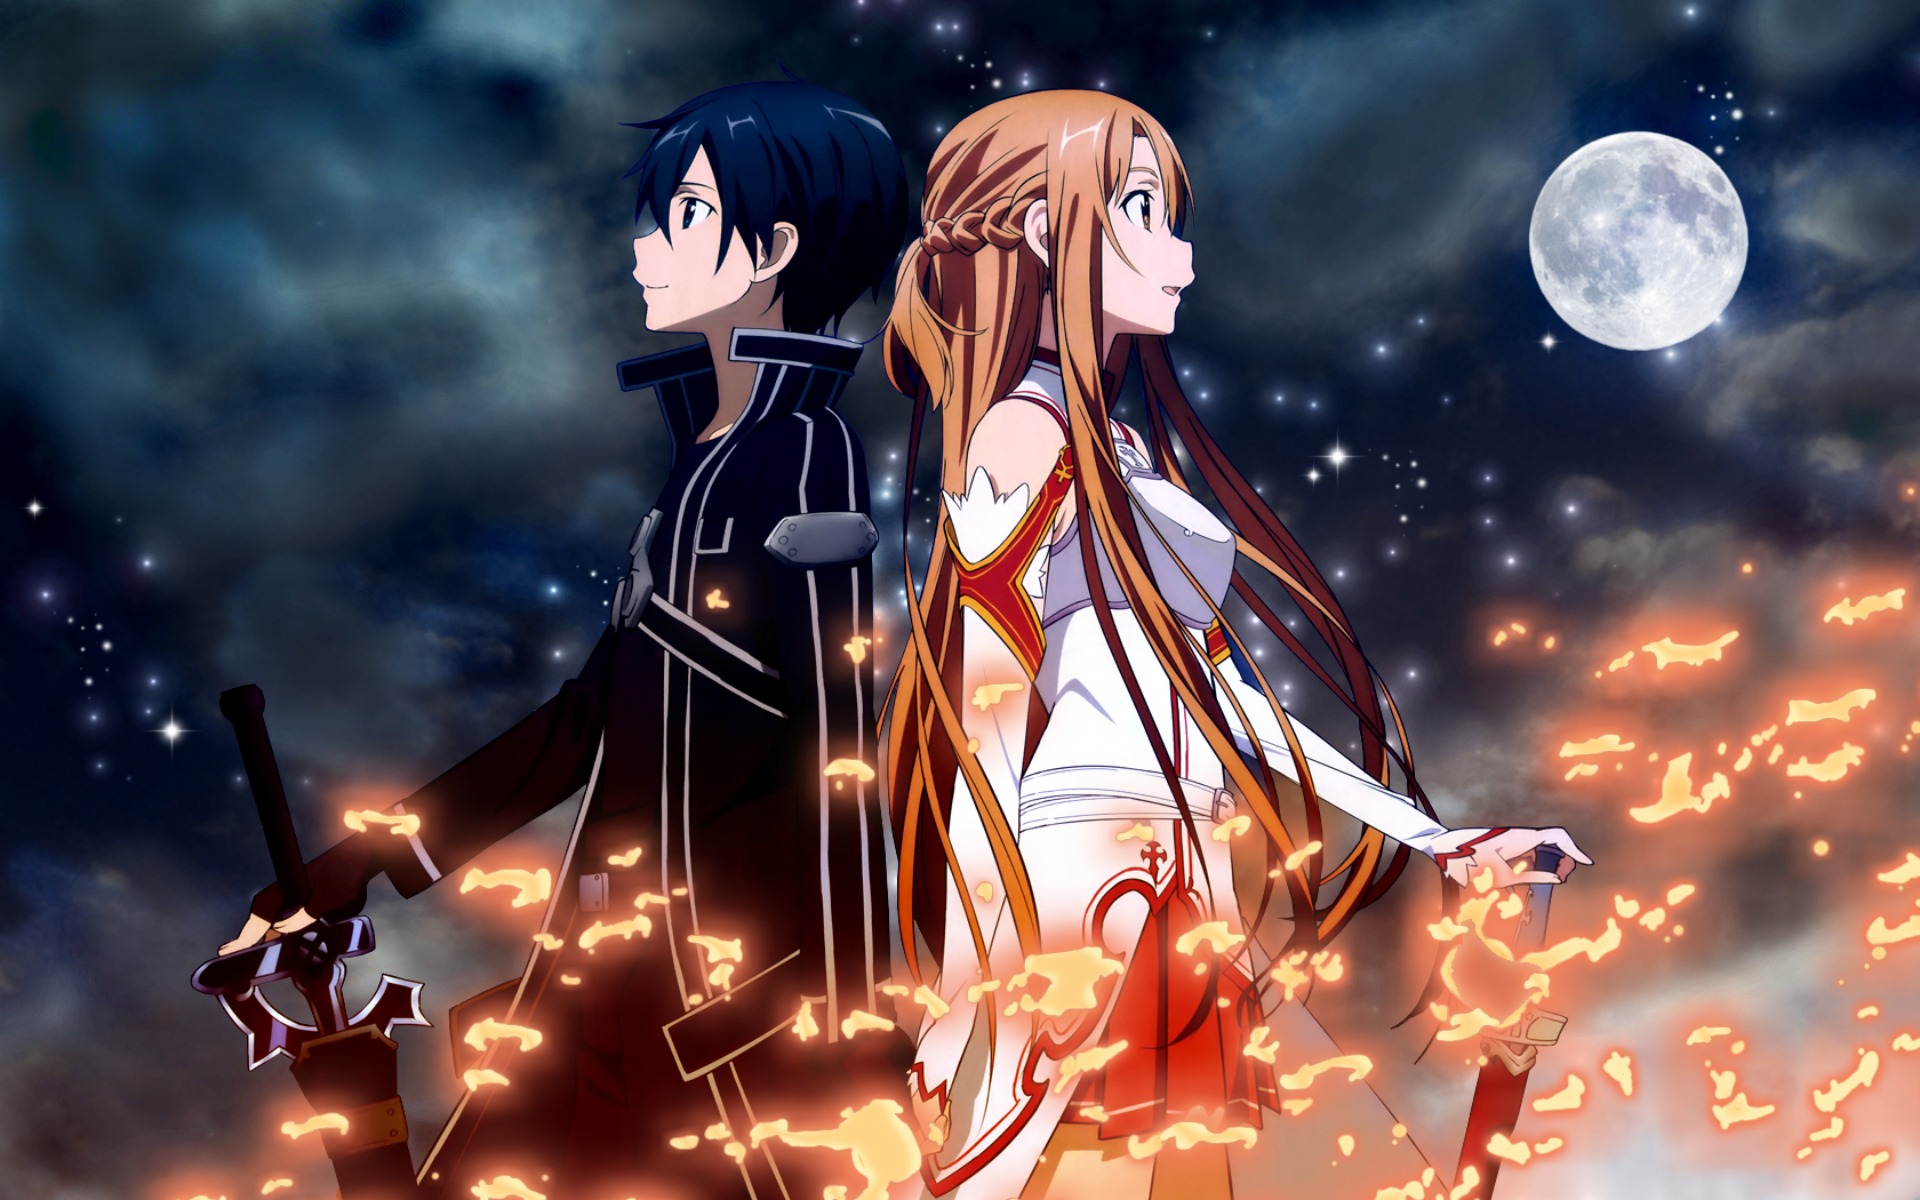  Art Online images SAO HD wallpaper and background photos 34784898